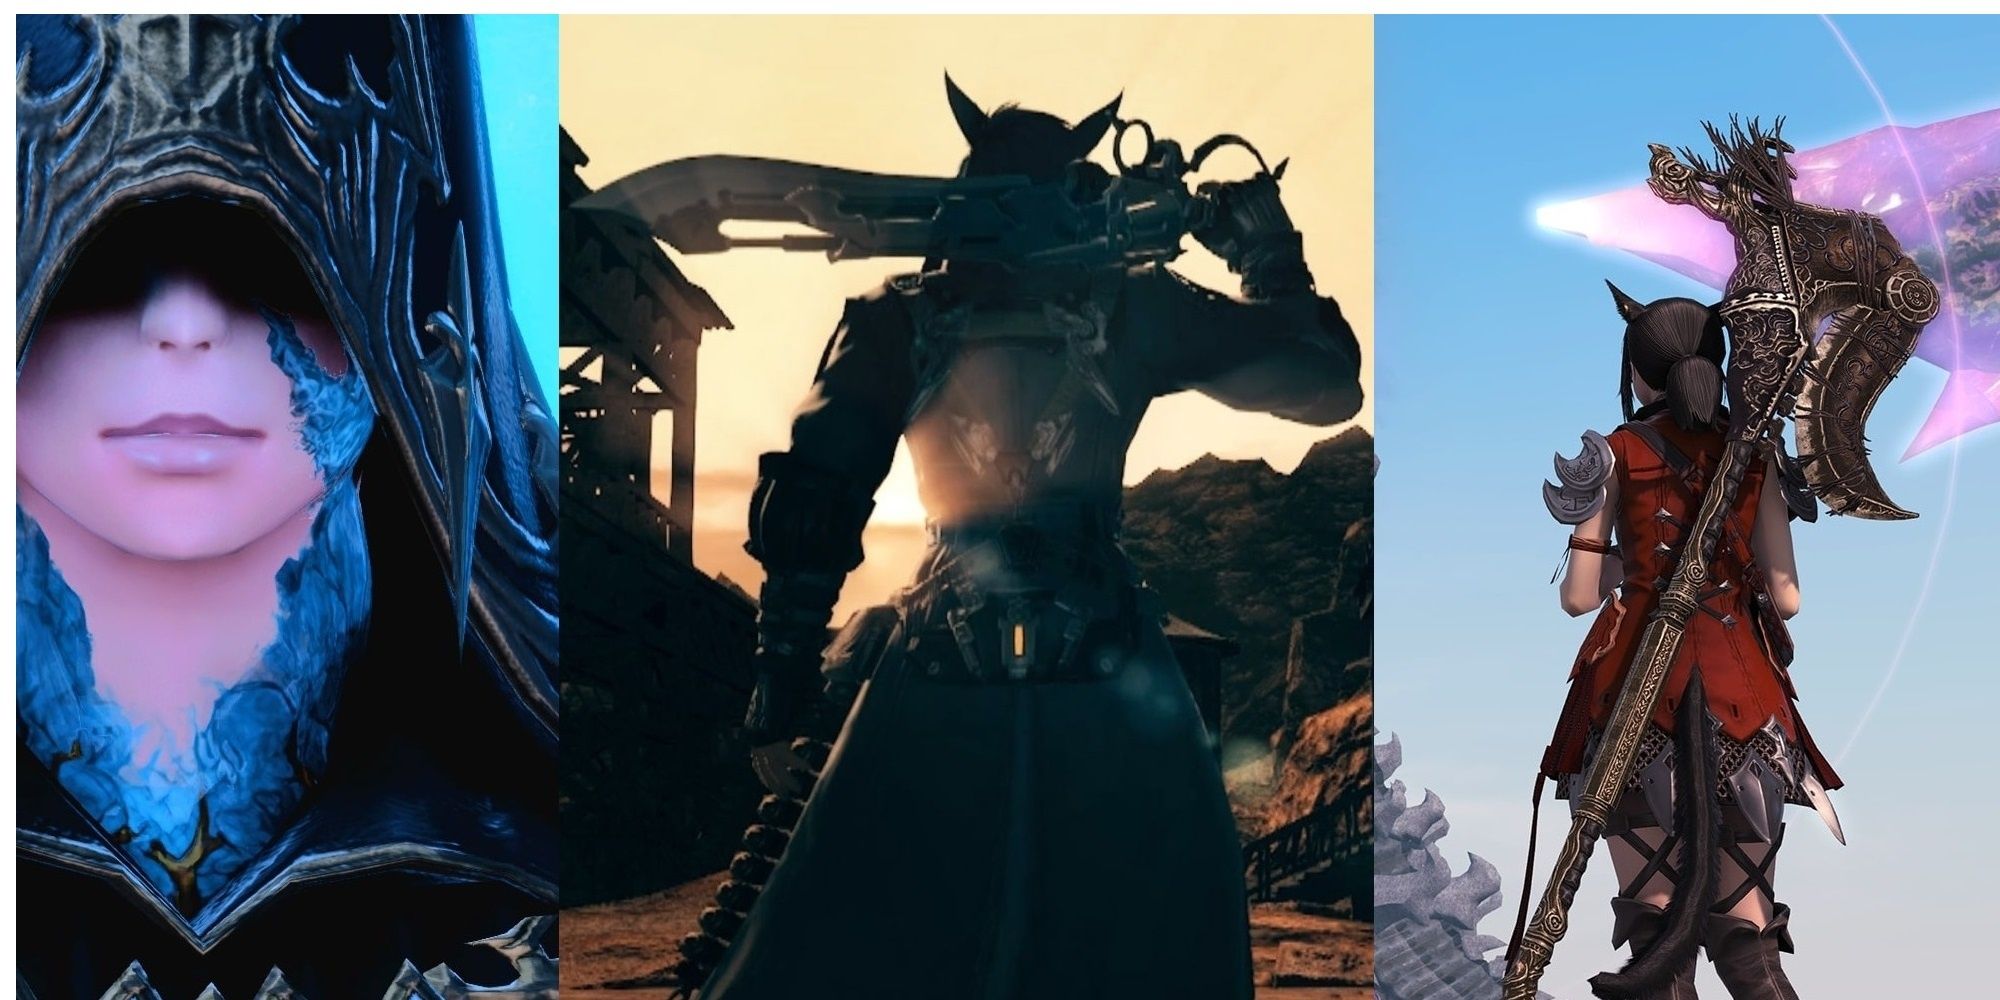 Final Fantasy 14 mods split image screenshot of hooded figure and images of two warriors facing away.